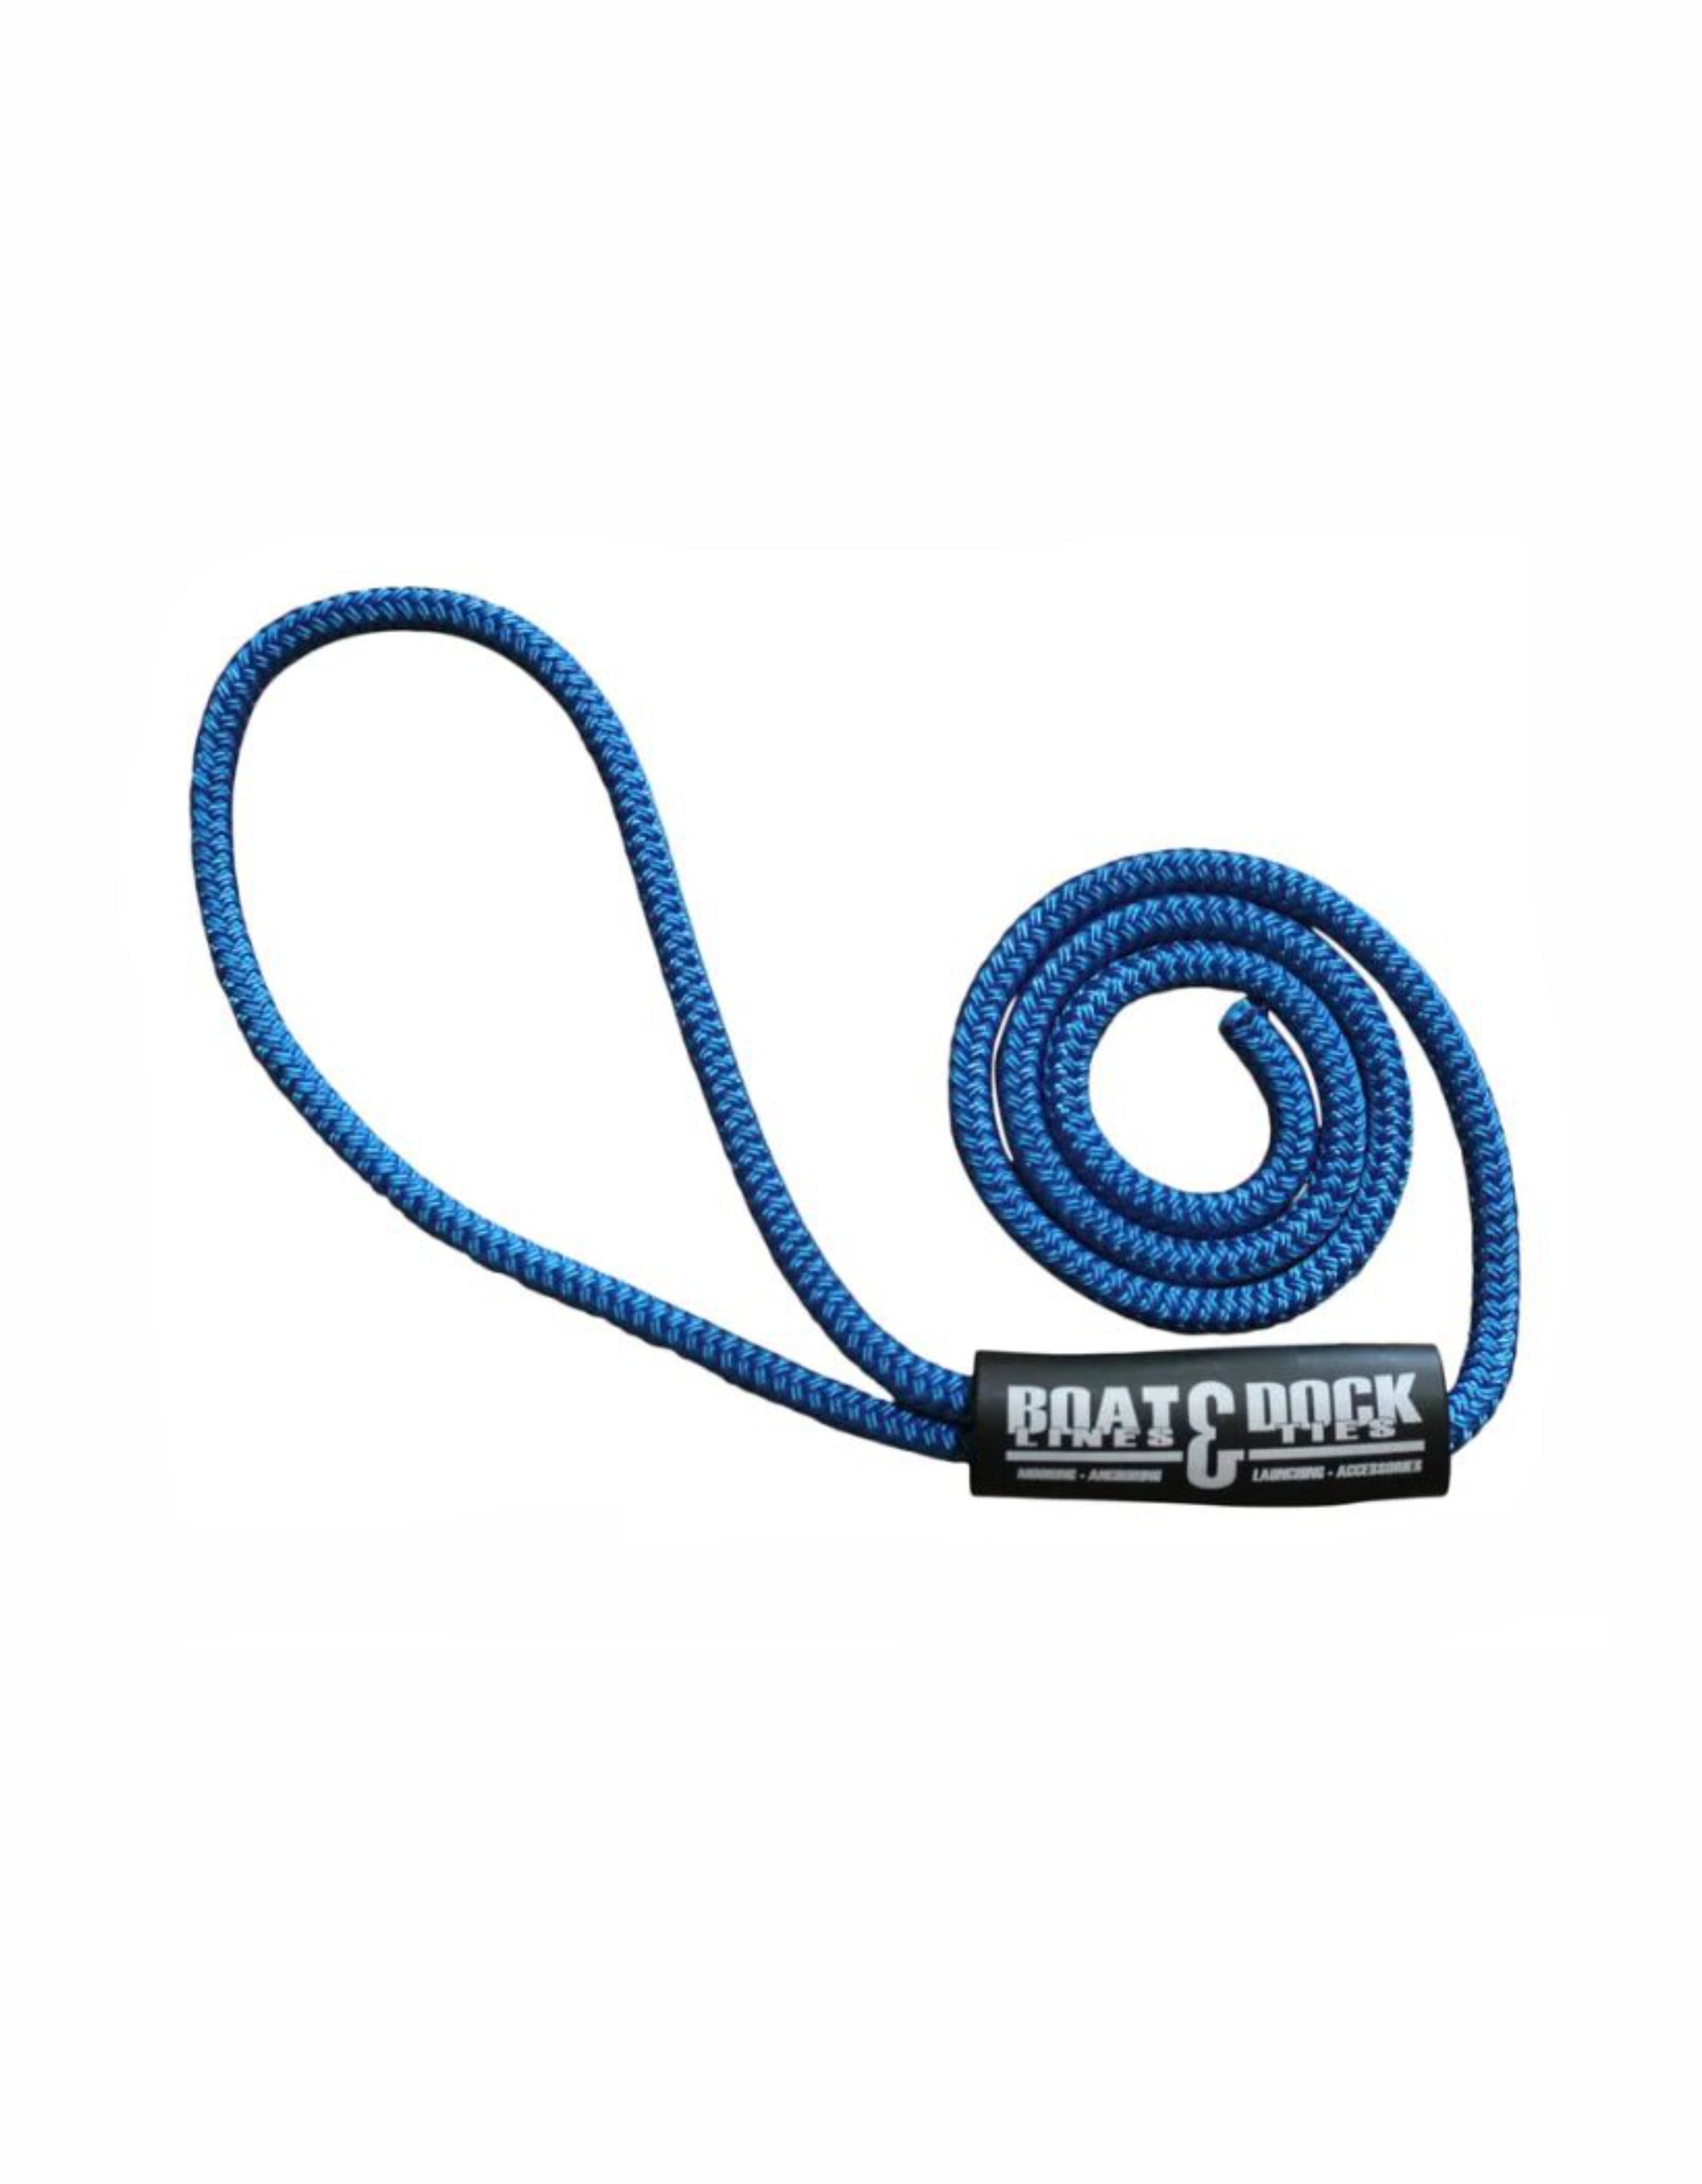  Boat Throw Rope- Double Braided Nylon Rope, Stitched